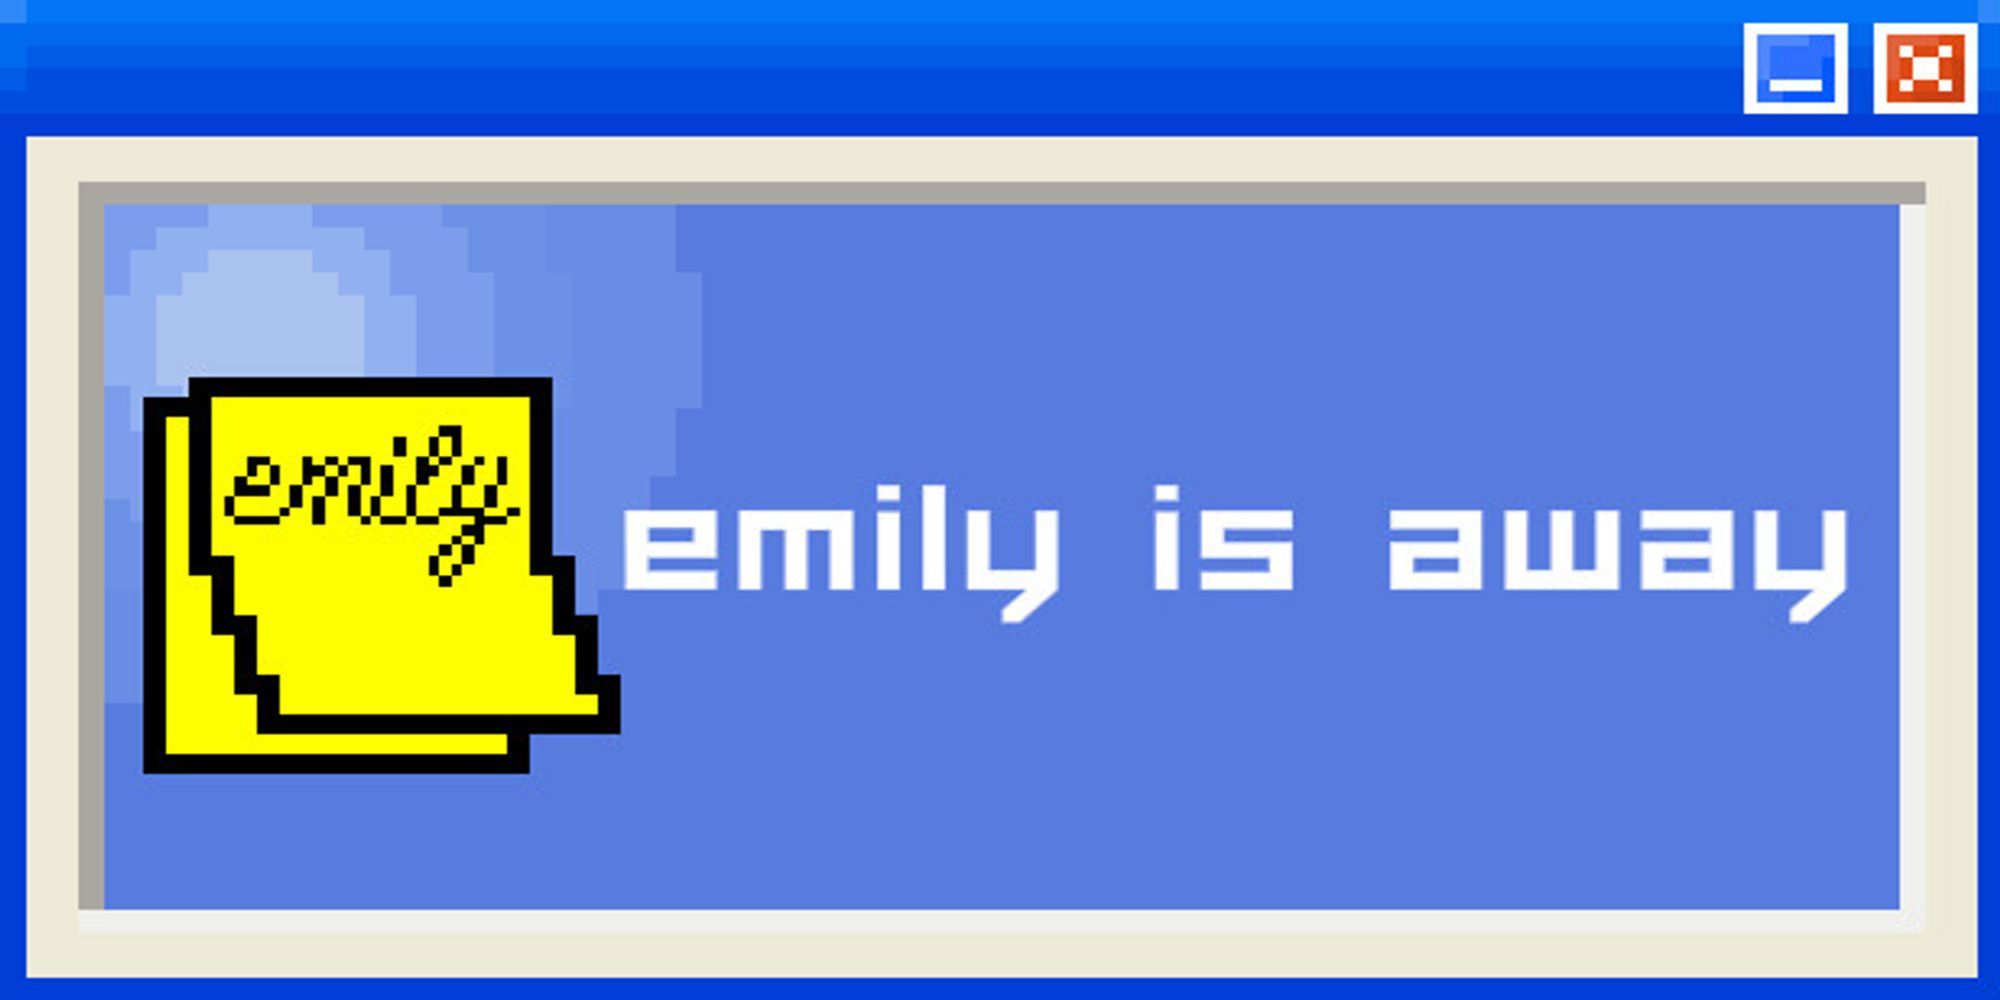 Emily Is Away Steam Image